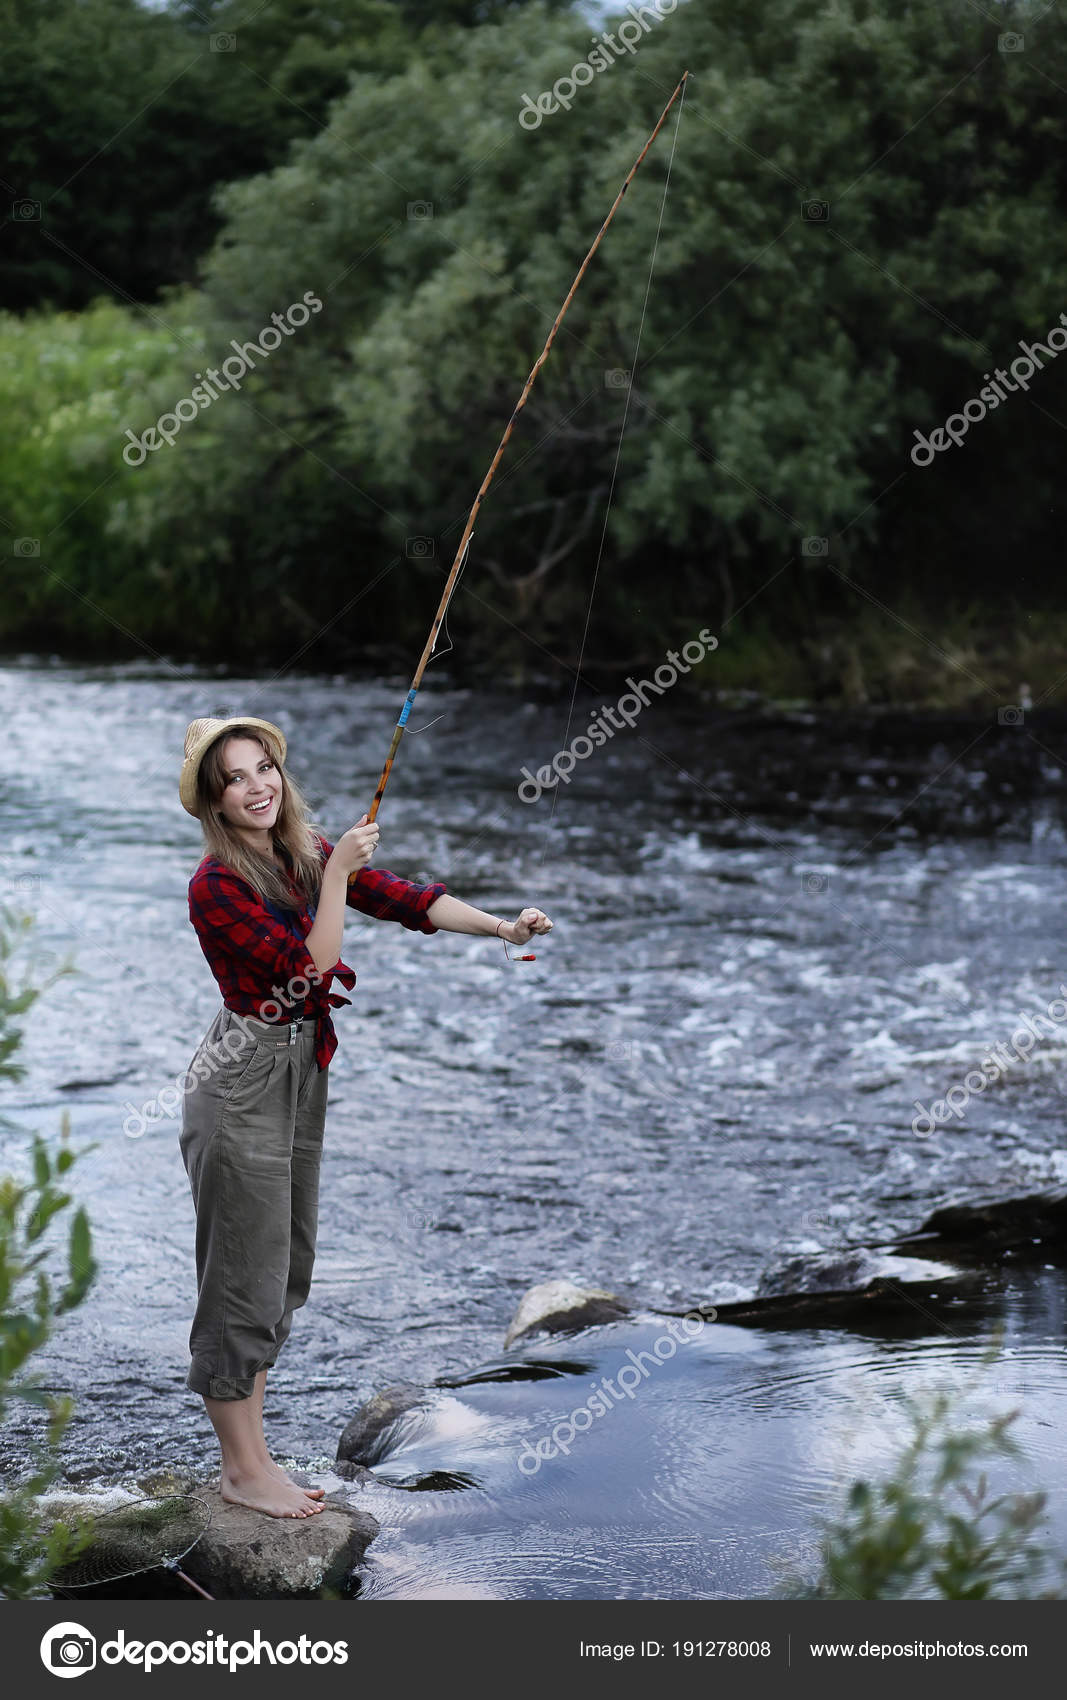 Girl by the river with a fishing rod — Stock Photo © alexkich